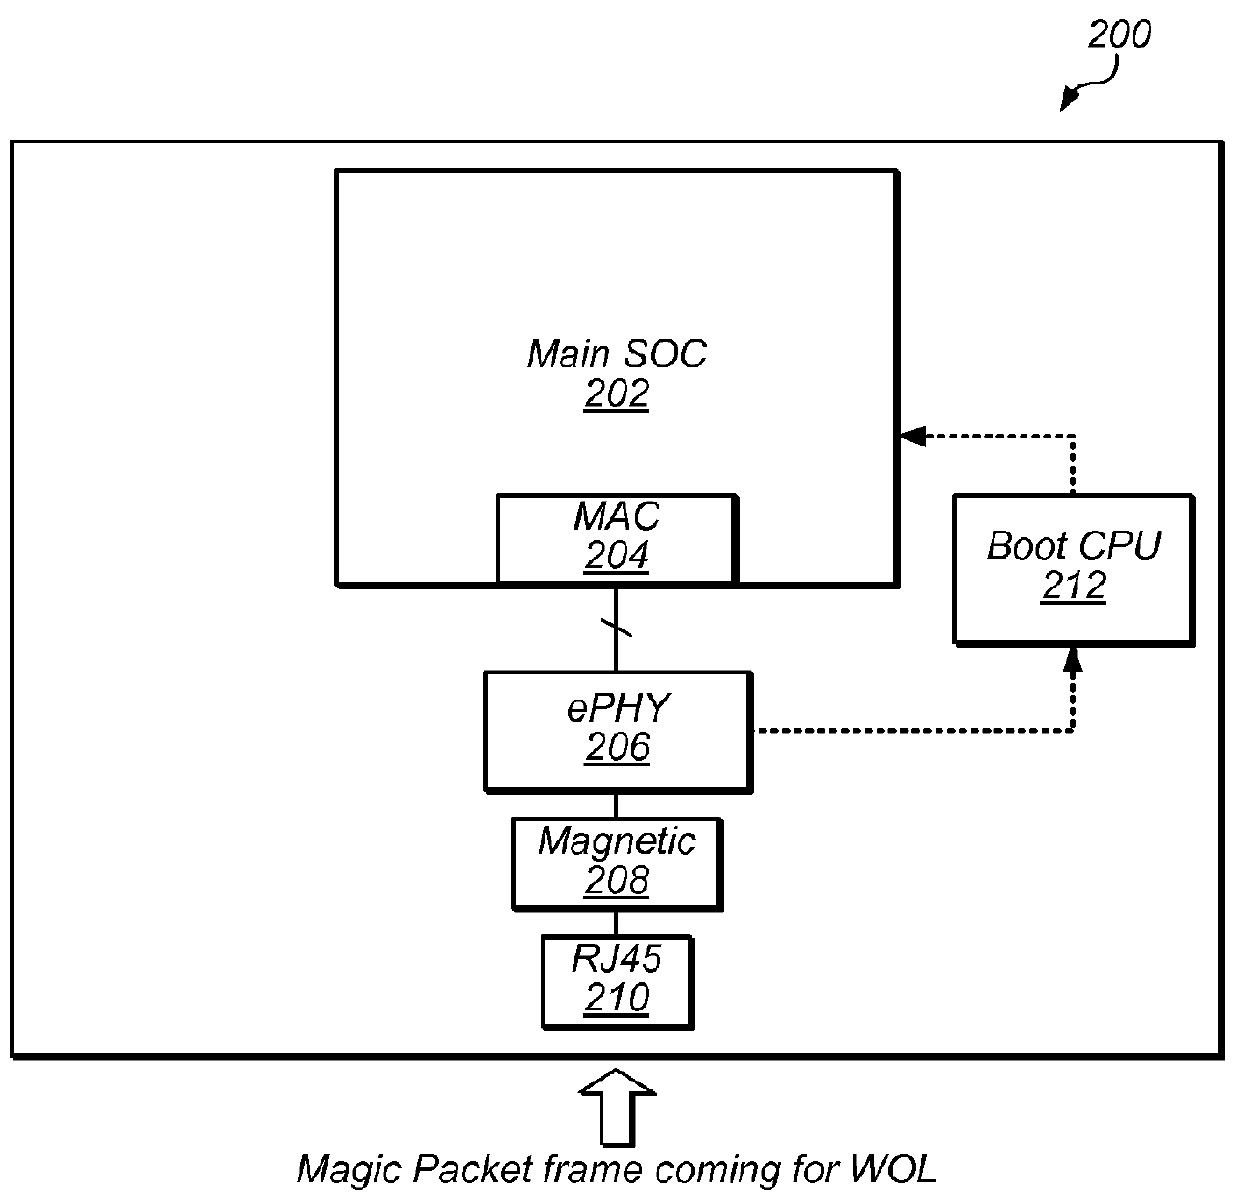 MAC Filtering on Ethernet PHY for Wake-On-LAN